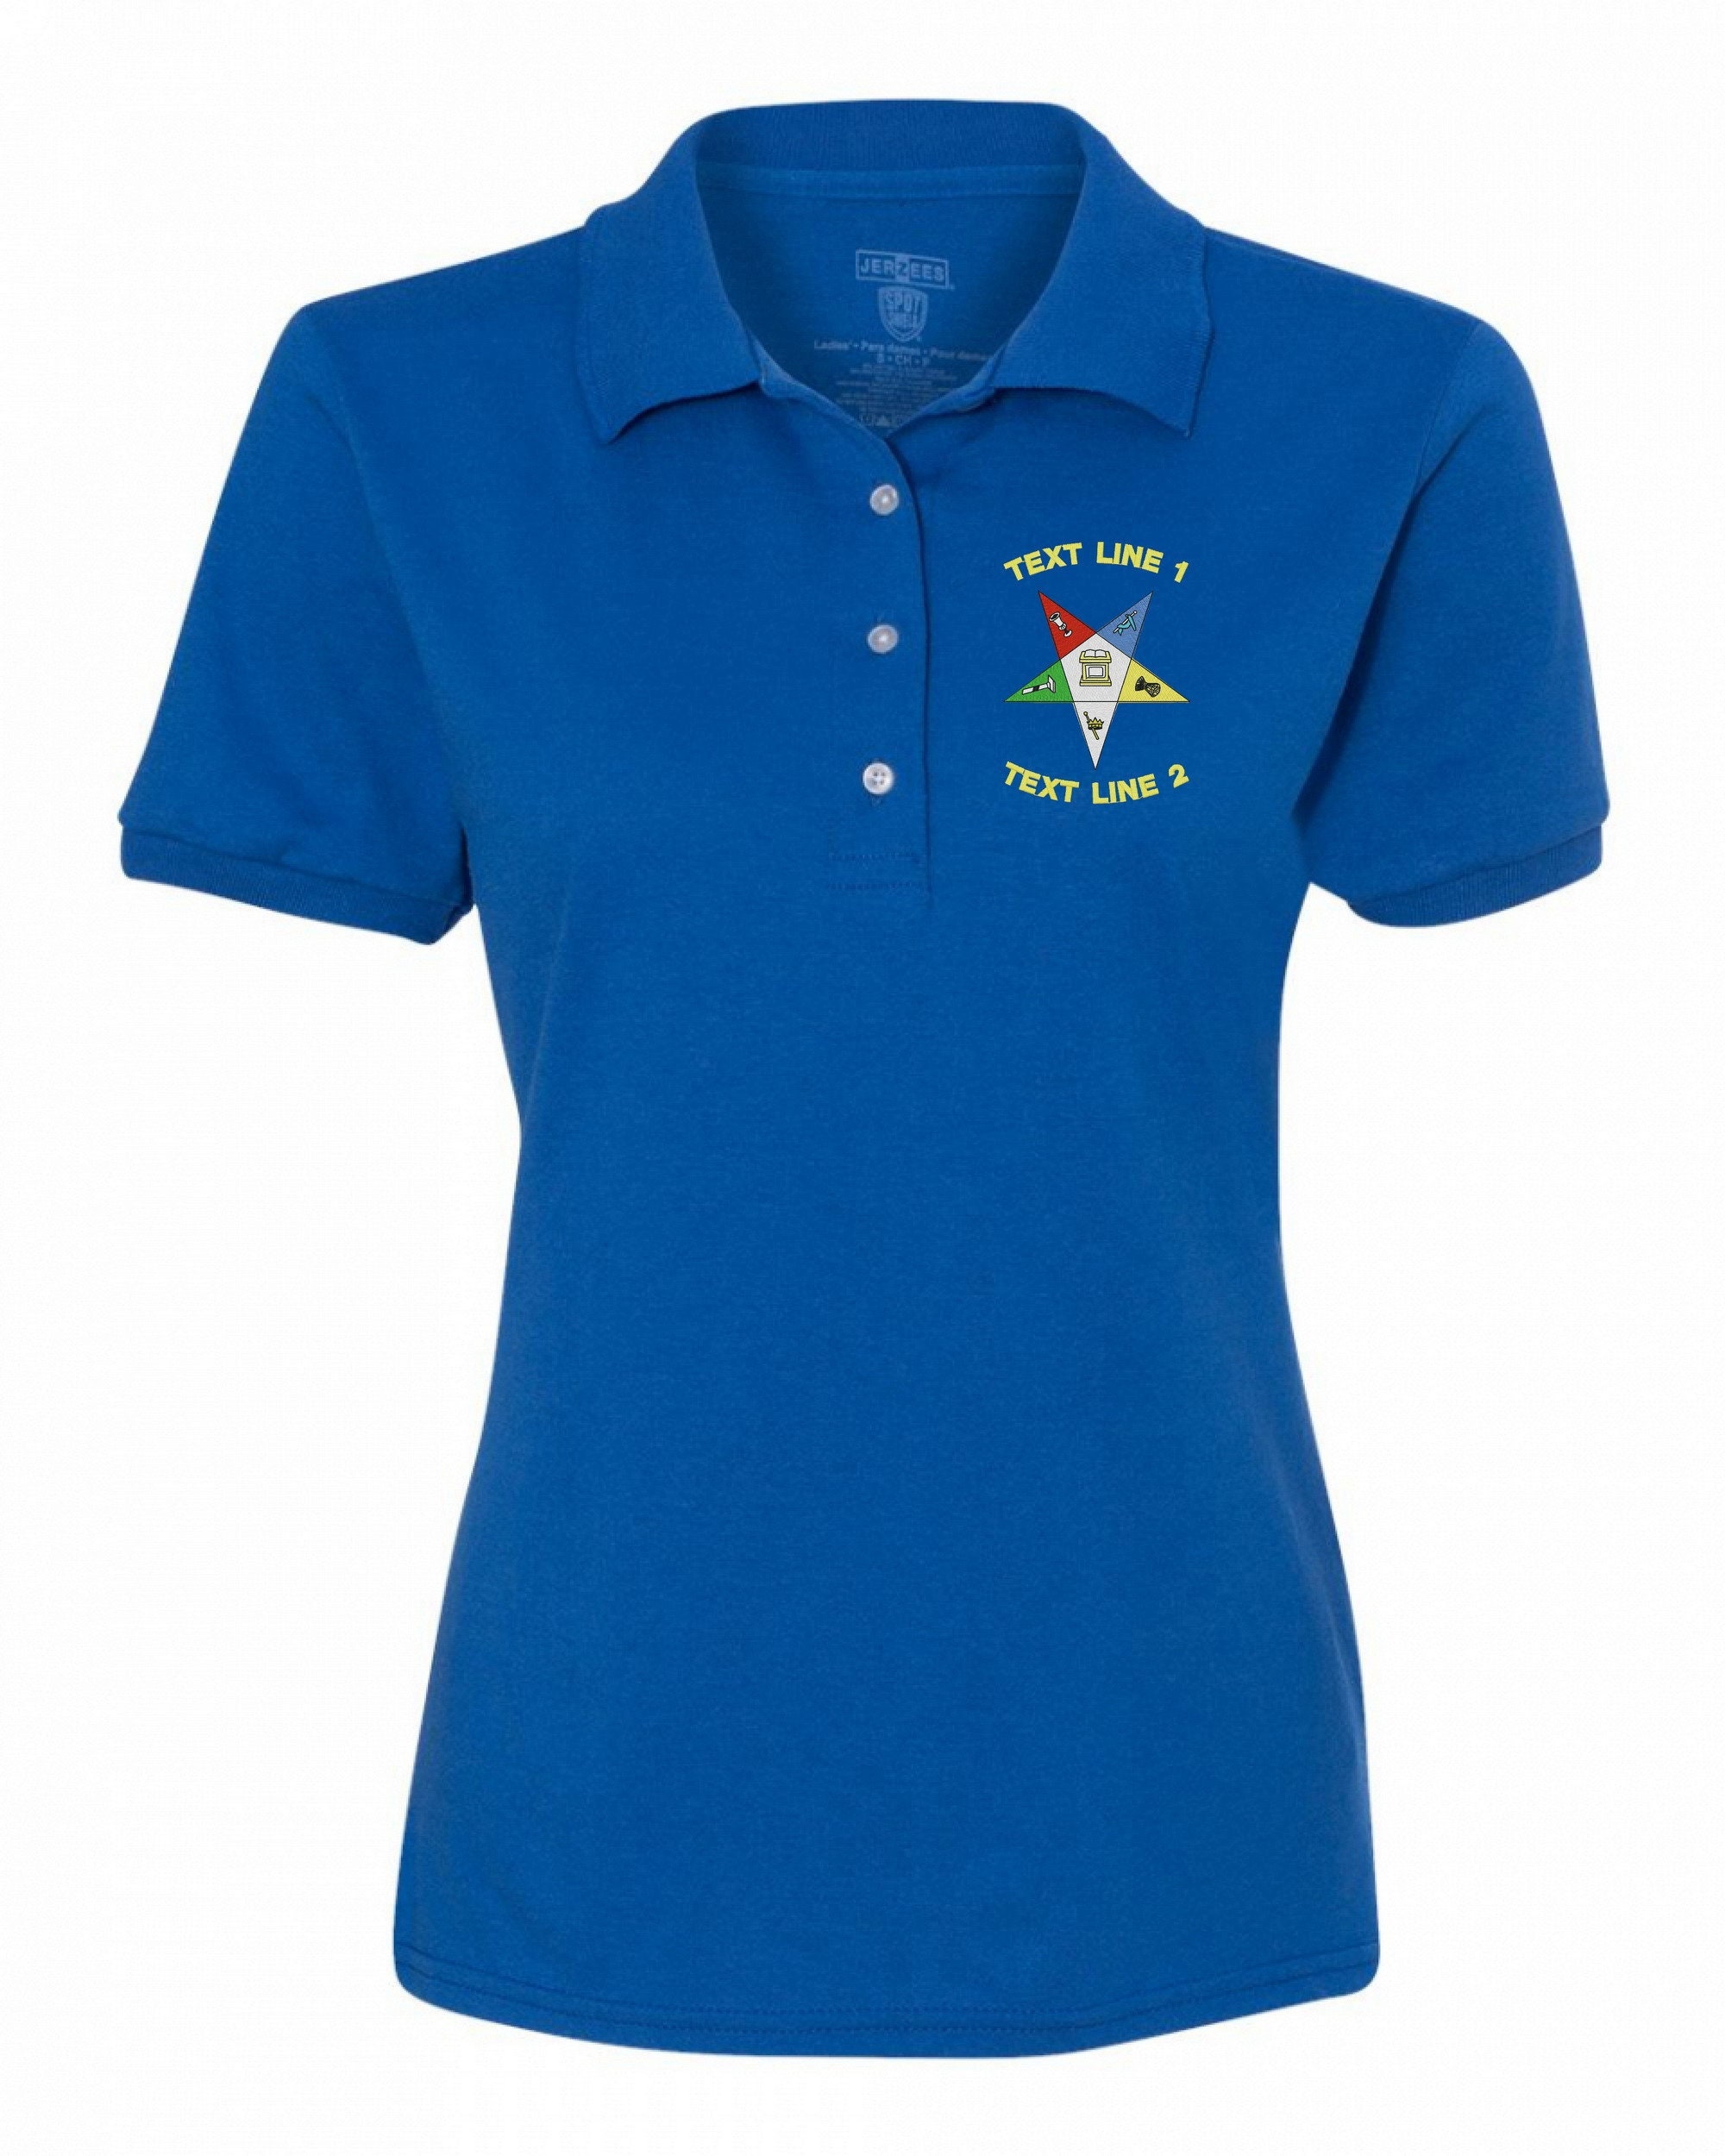 OES Eastern Star Embroidered Ladies Polo Shirt | Fraternal Awards